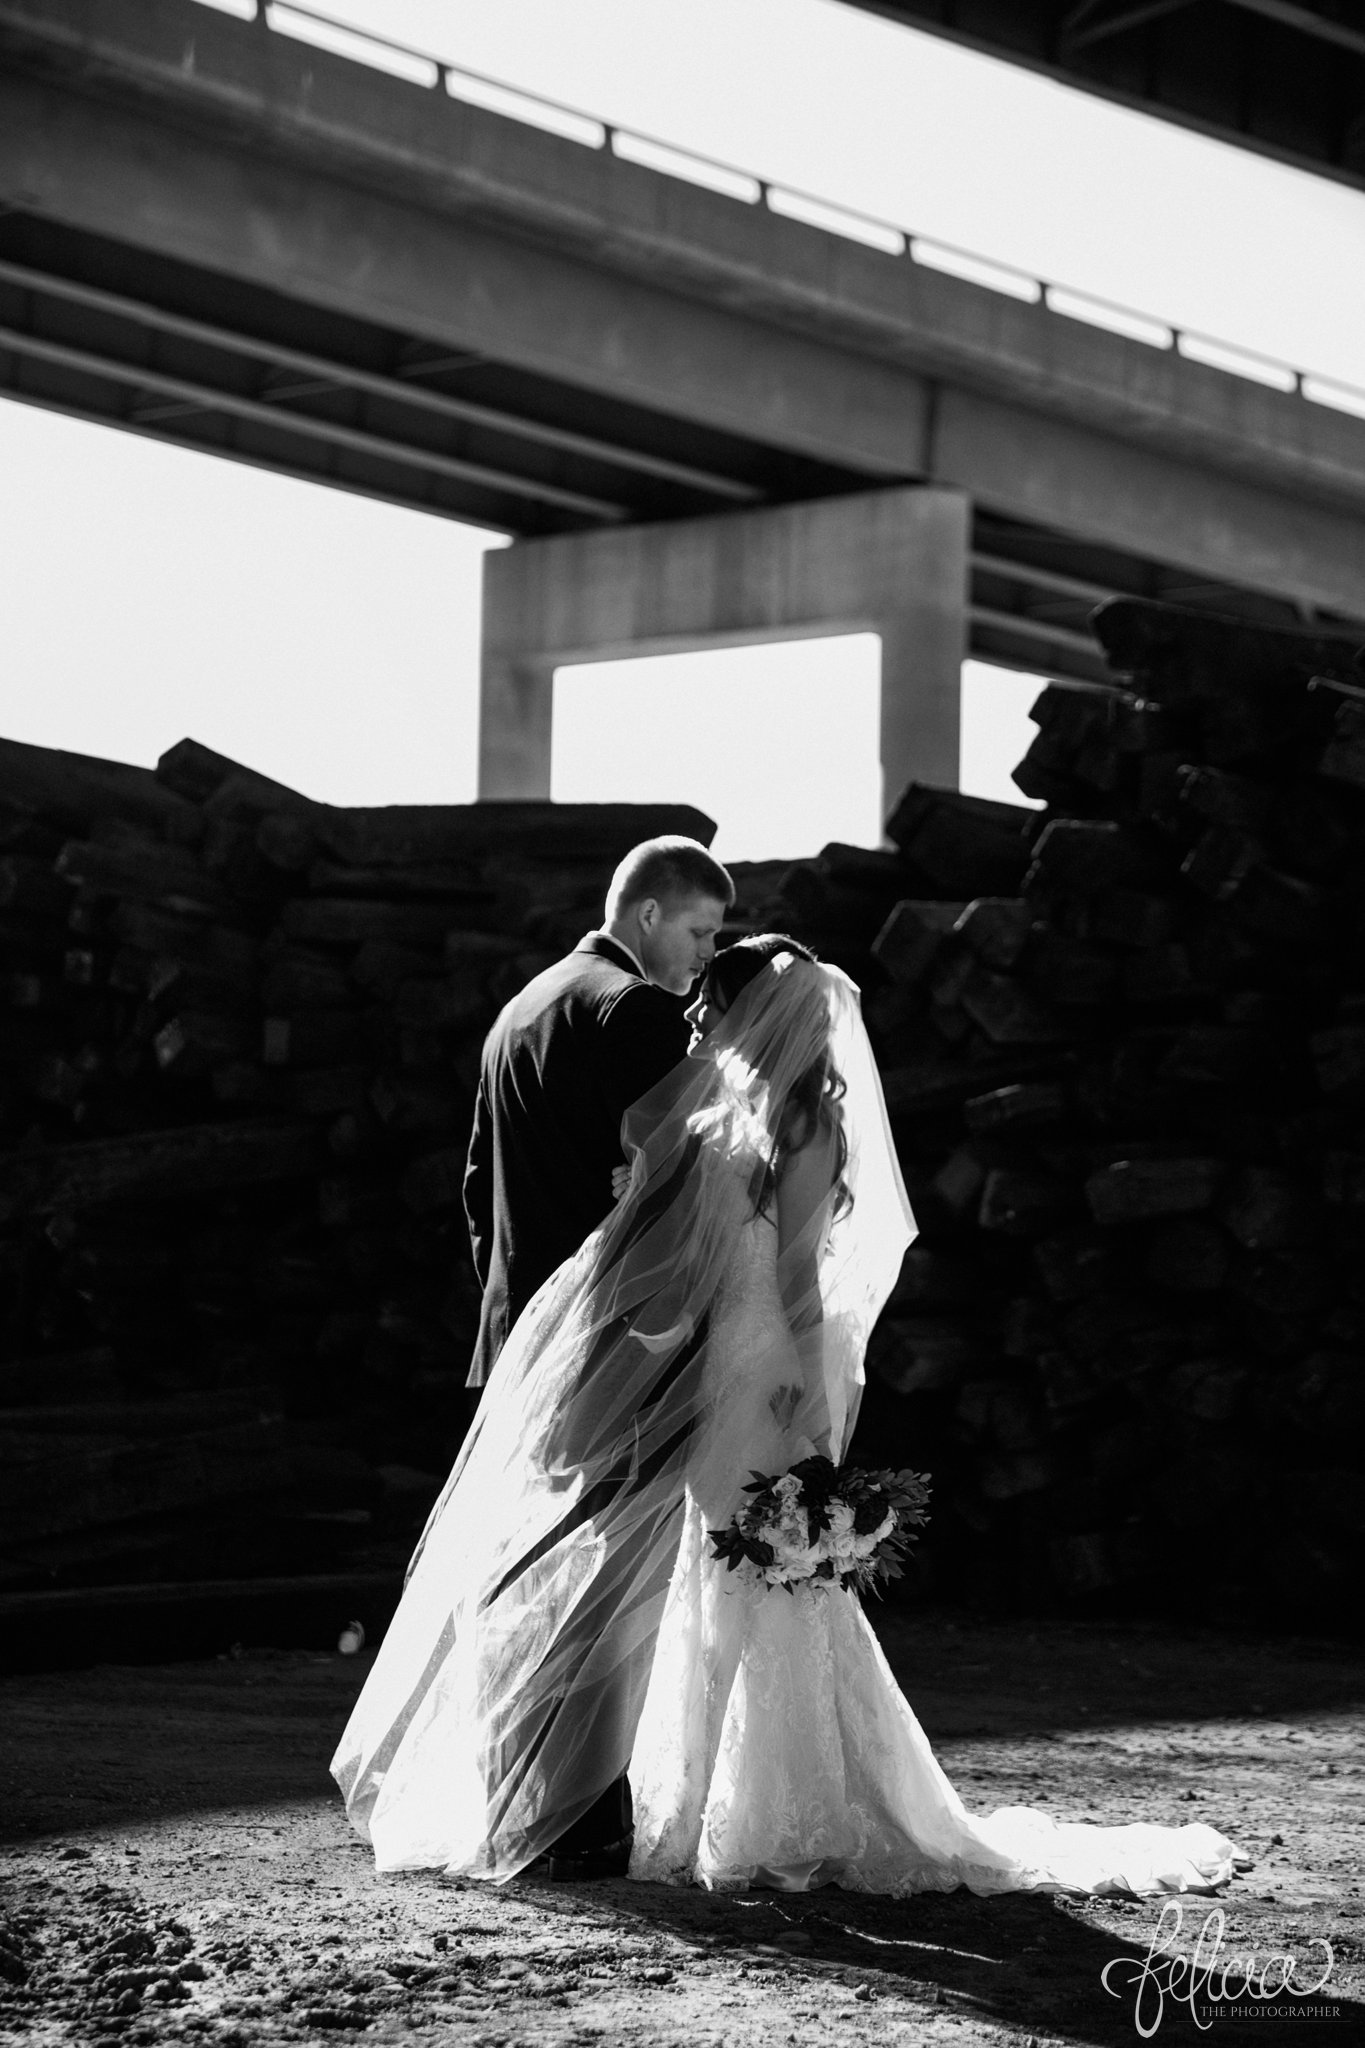 black and white | wedding | wedding photos | industrial | Rumely Event Space | wedding photography | images by feliciathephotographer.com | West Bottoms | industrial background | bride and groom portraits | forehead kiss | romantic pose | dramatic 